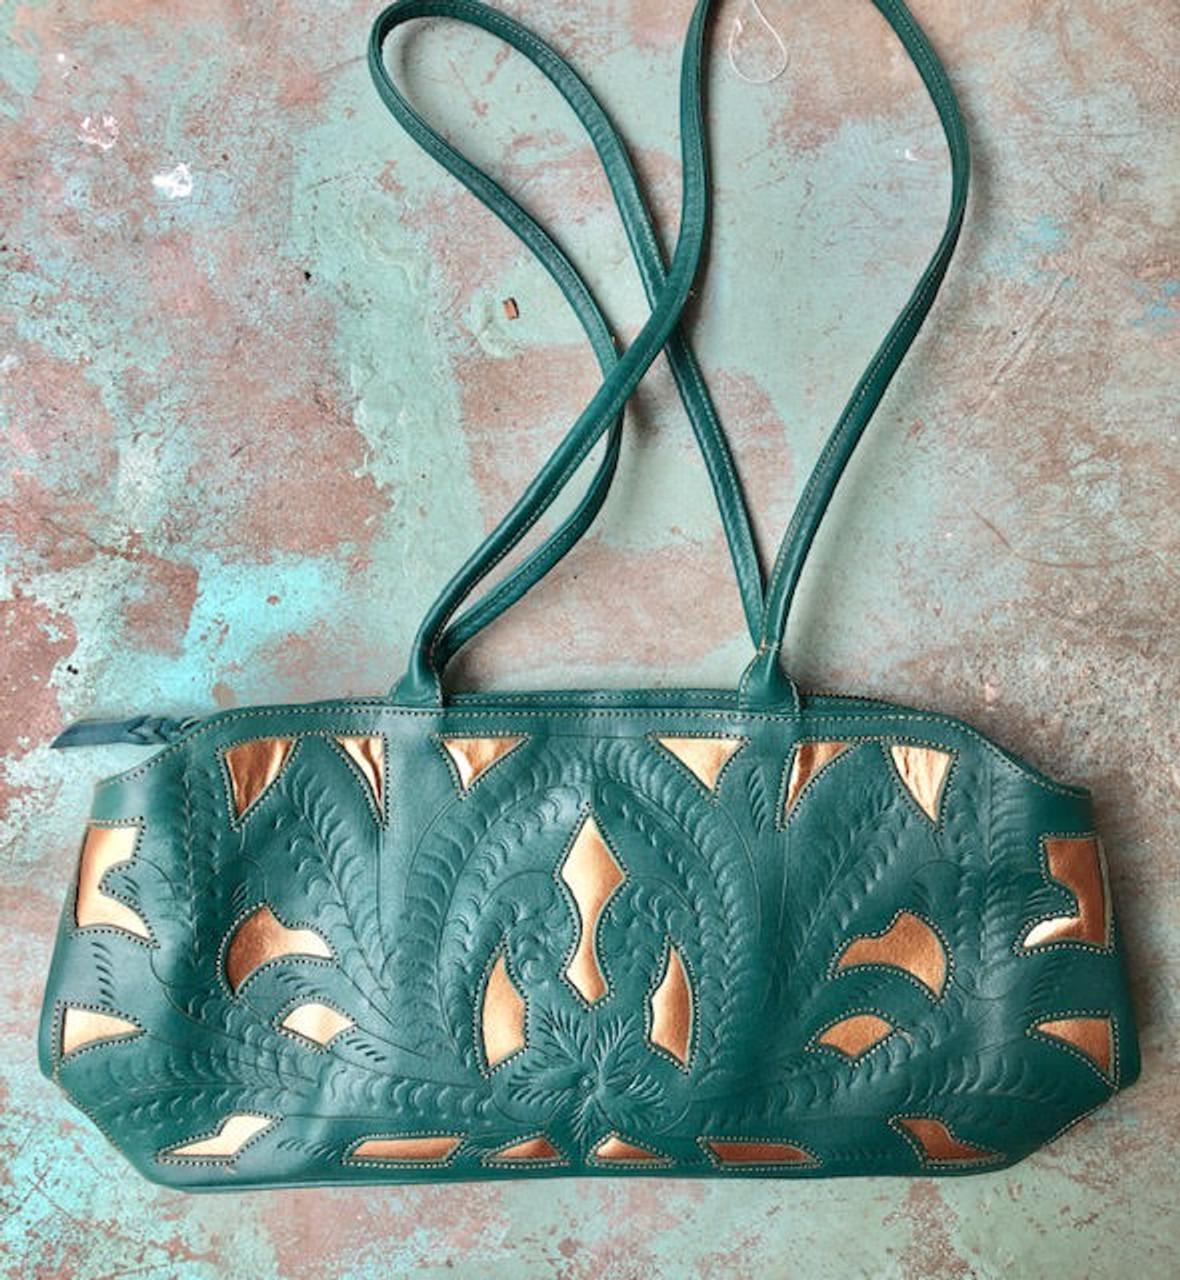 Beautiful Turquoise Leather Top Case / Handbag With Handles